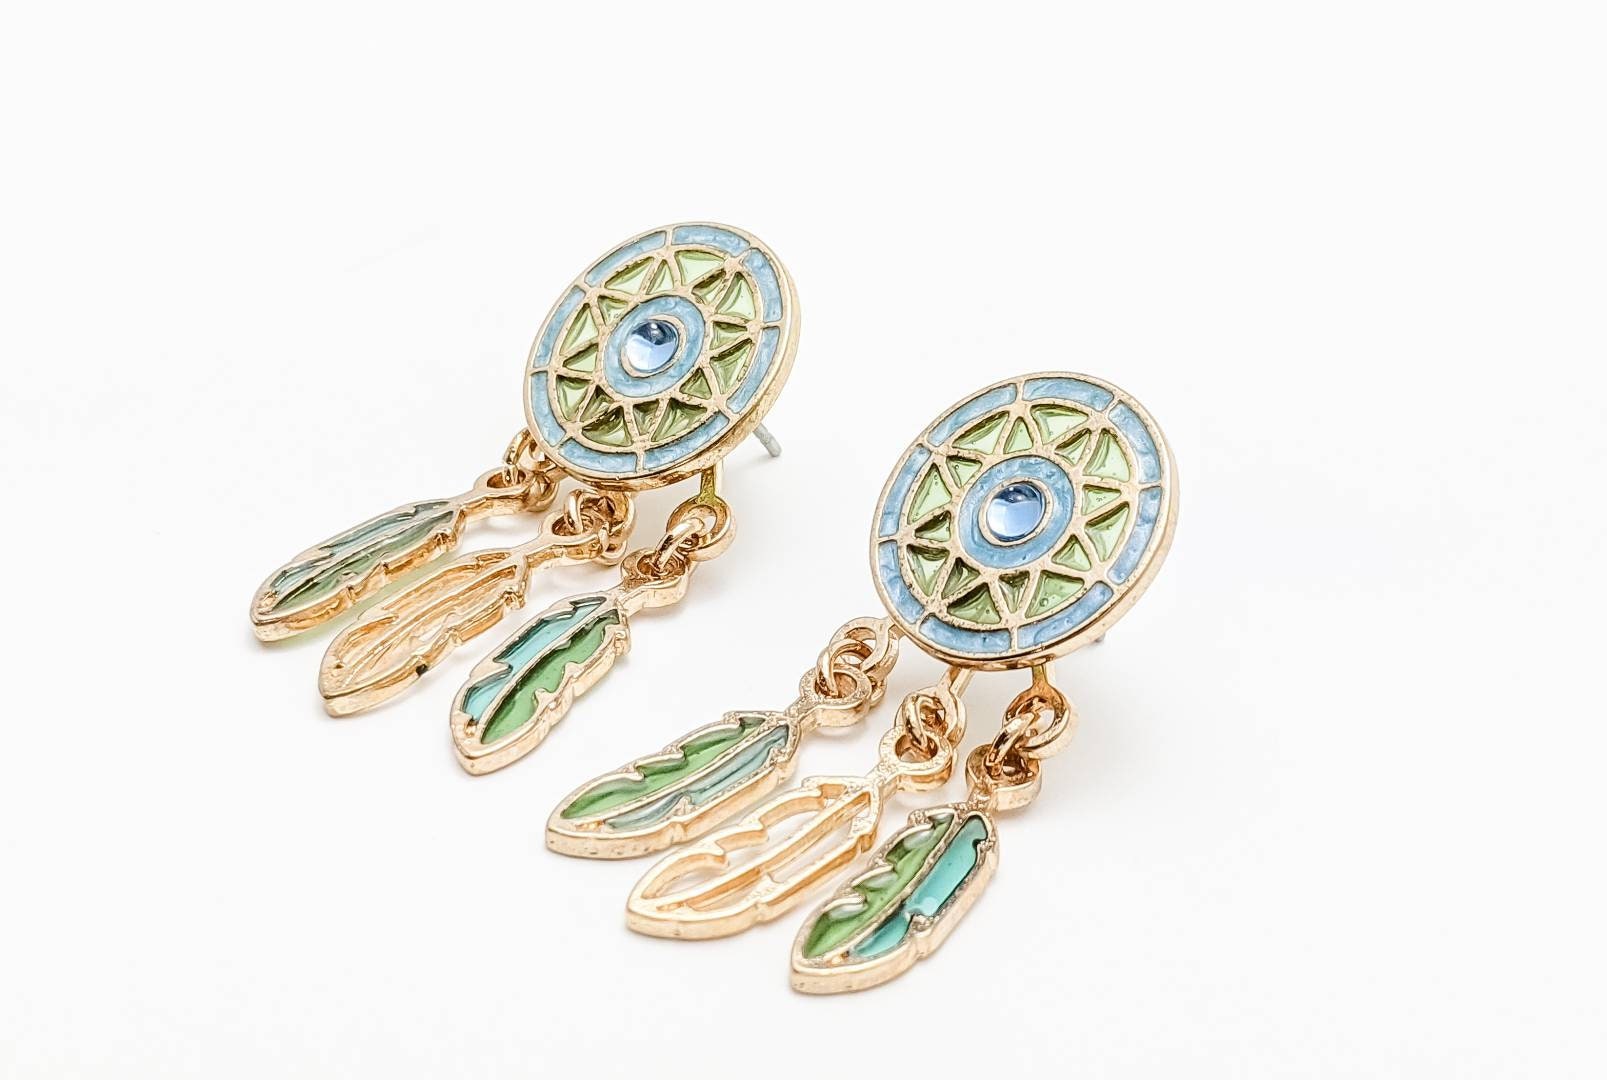 Details more than 228 dream catcher earrings claire’s best